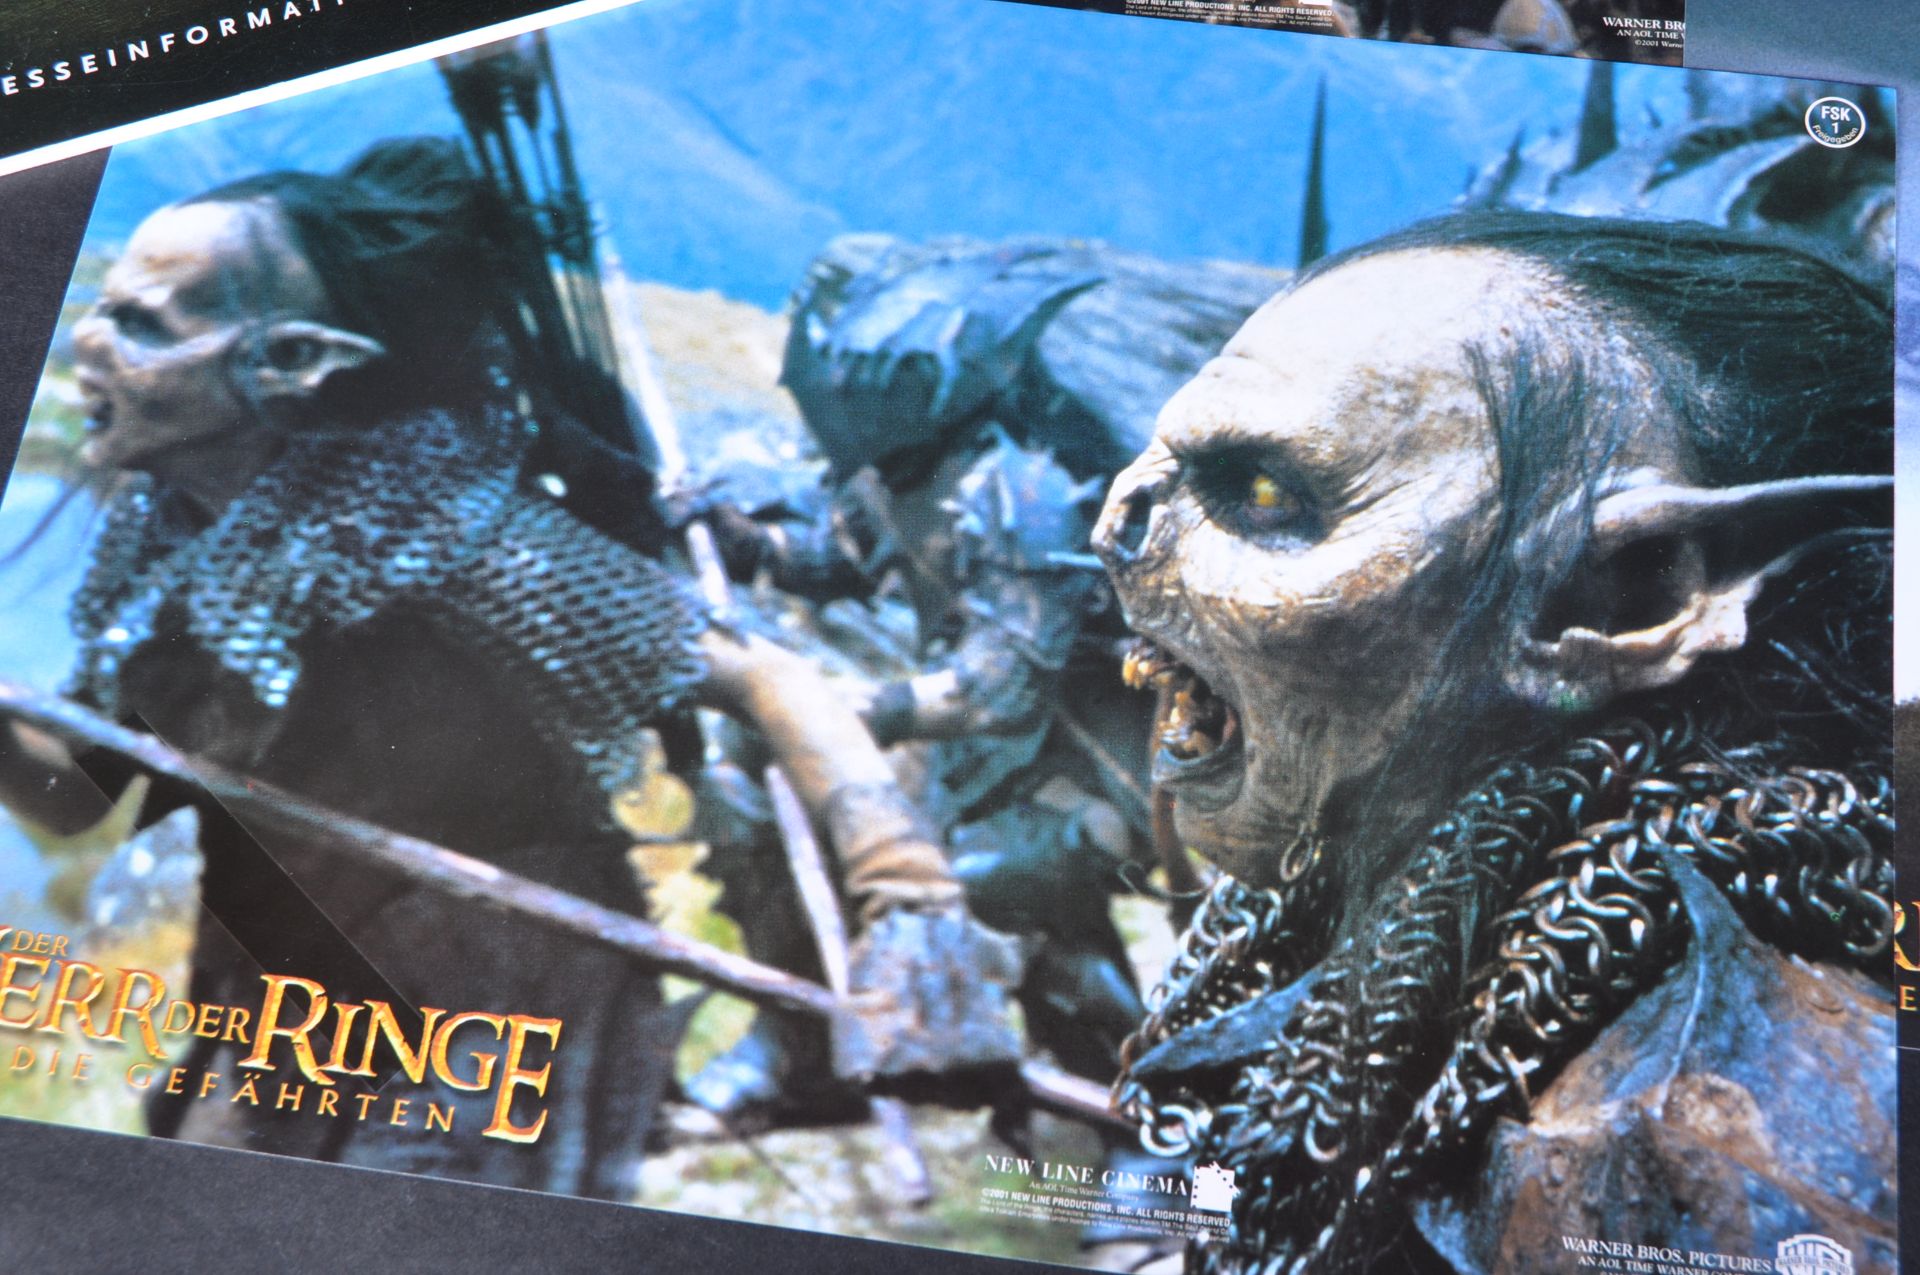 LORD OF THE RINGS - FELLOWSHIP OF THE RING - GERMAN CINEMA LOBBY CARDS - Image 4 of 8